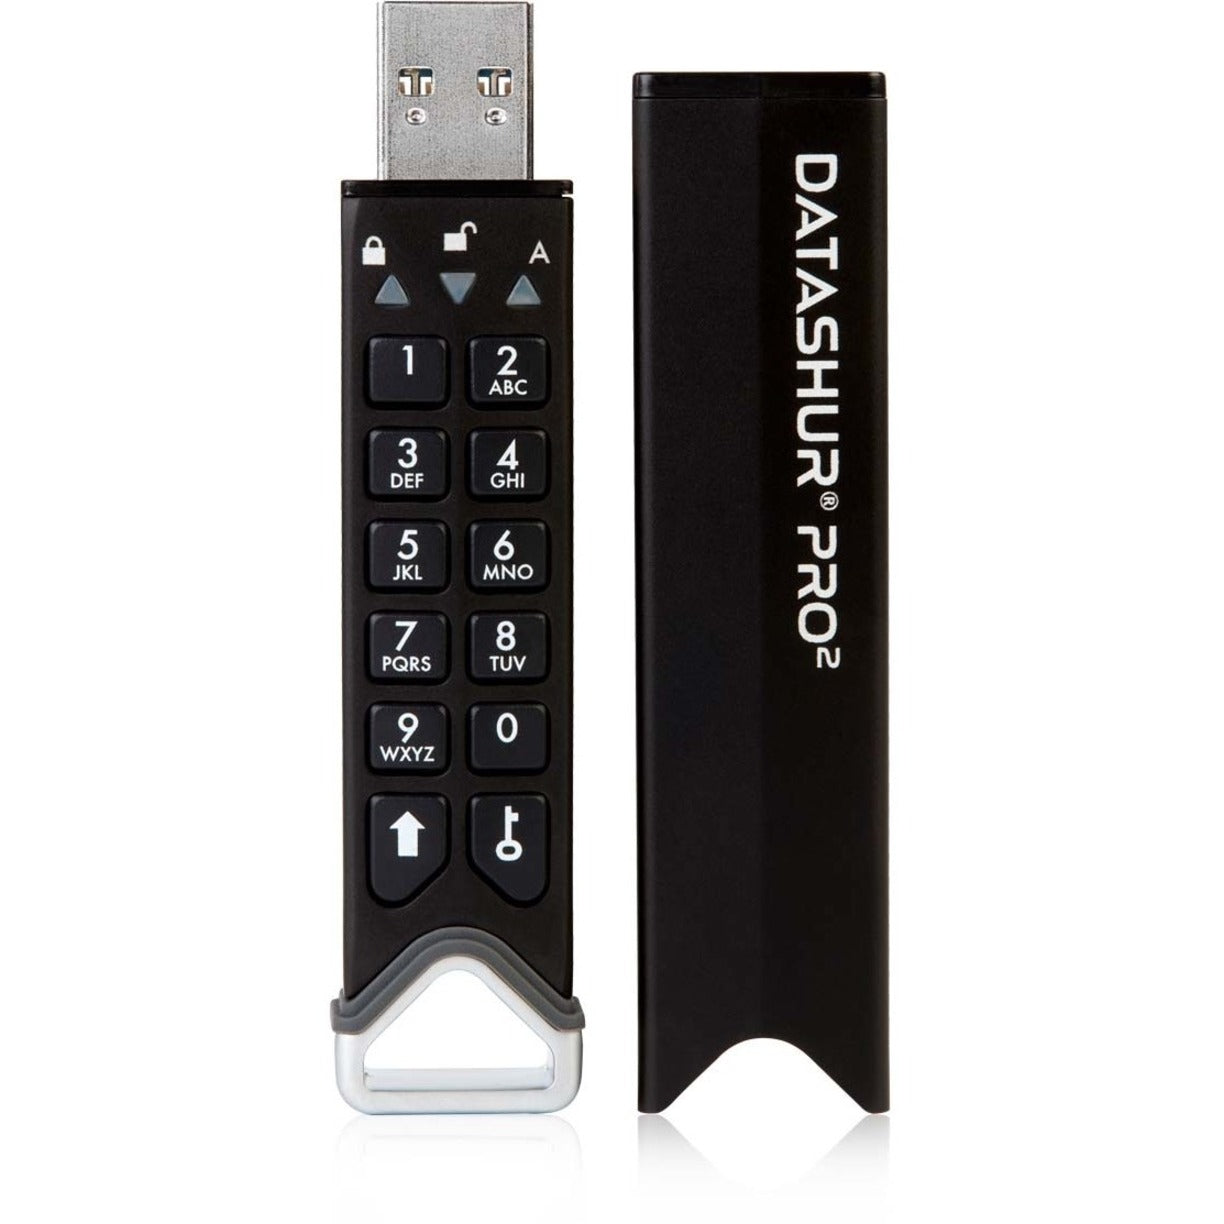 iStorage IS-FL-DP2-256-128 datAshur PRO² 128GB USB 3.2 (Gen 1) Type A Flash Drive, Secure, FIPS 140-2 Level 3 Certified, Password Protected, Dust/Water-Resistant